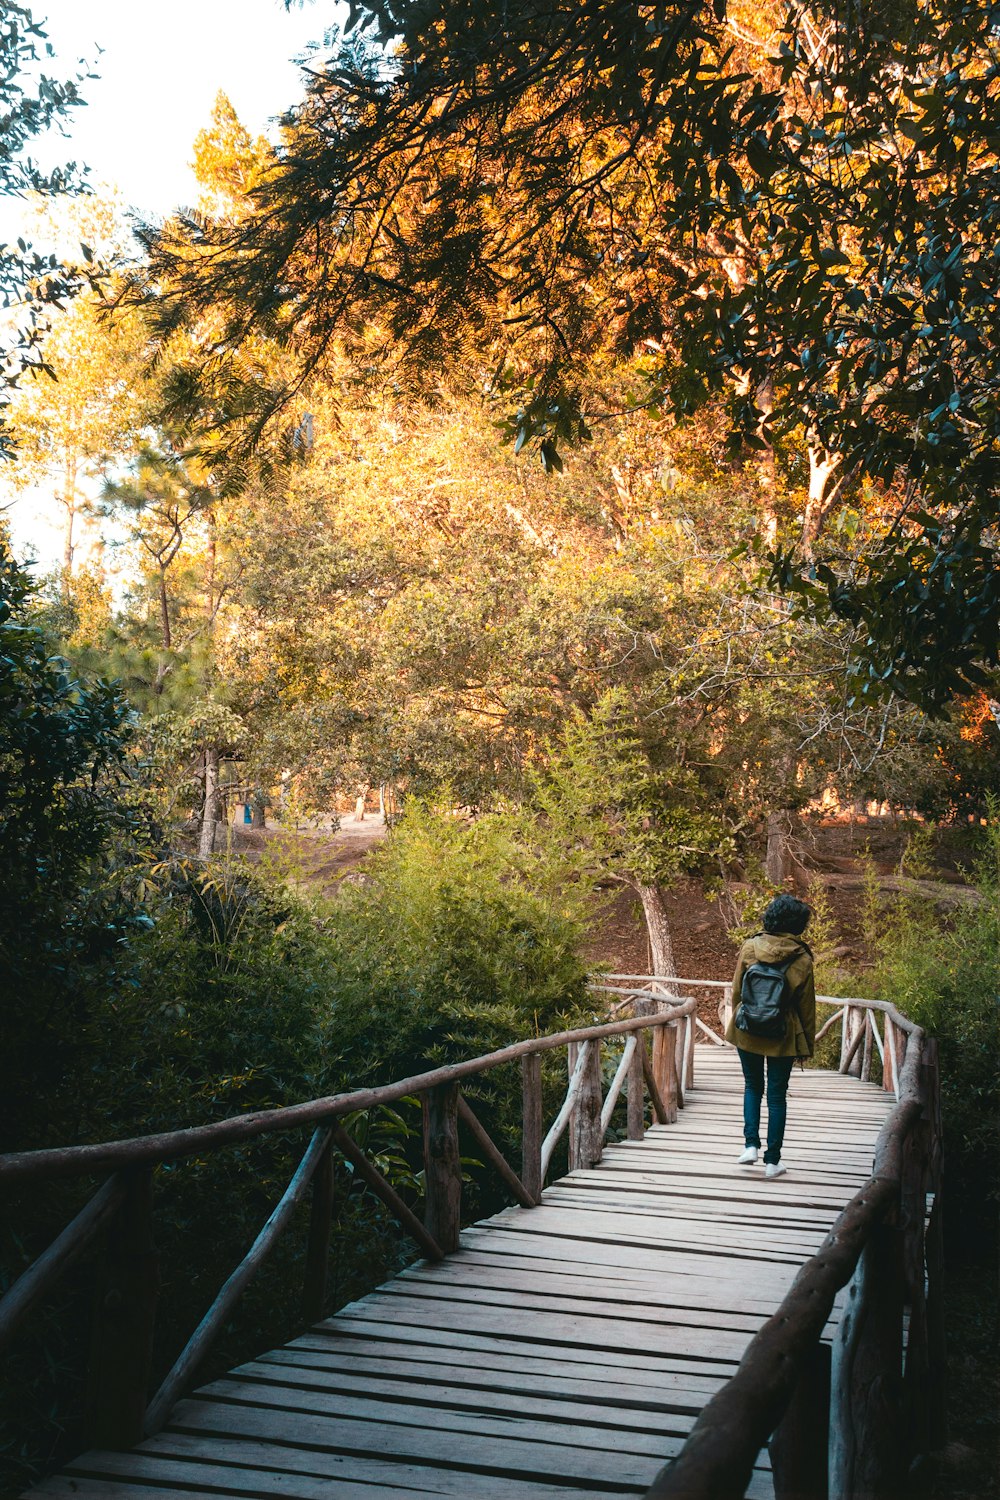 man in green jacket walking on wooden bridge surrounded by trees during daytime